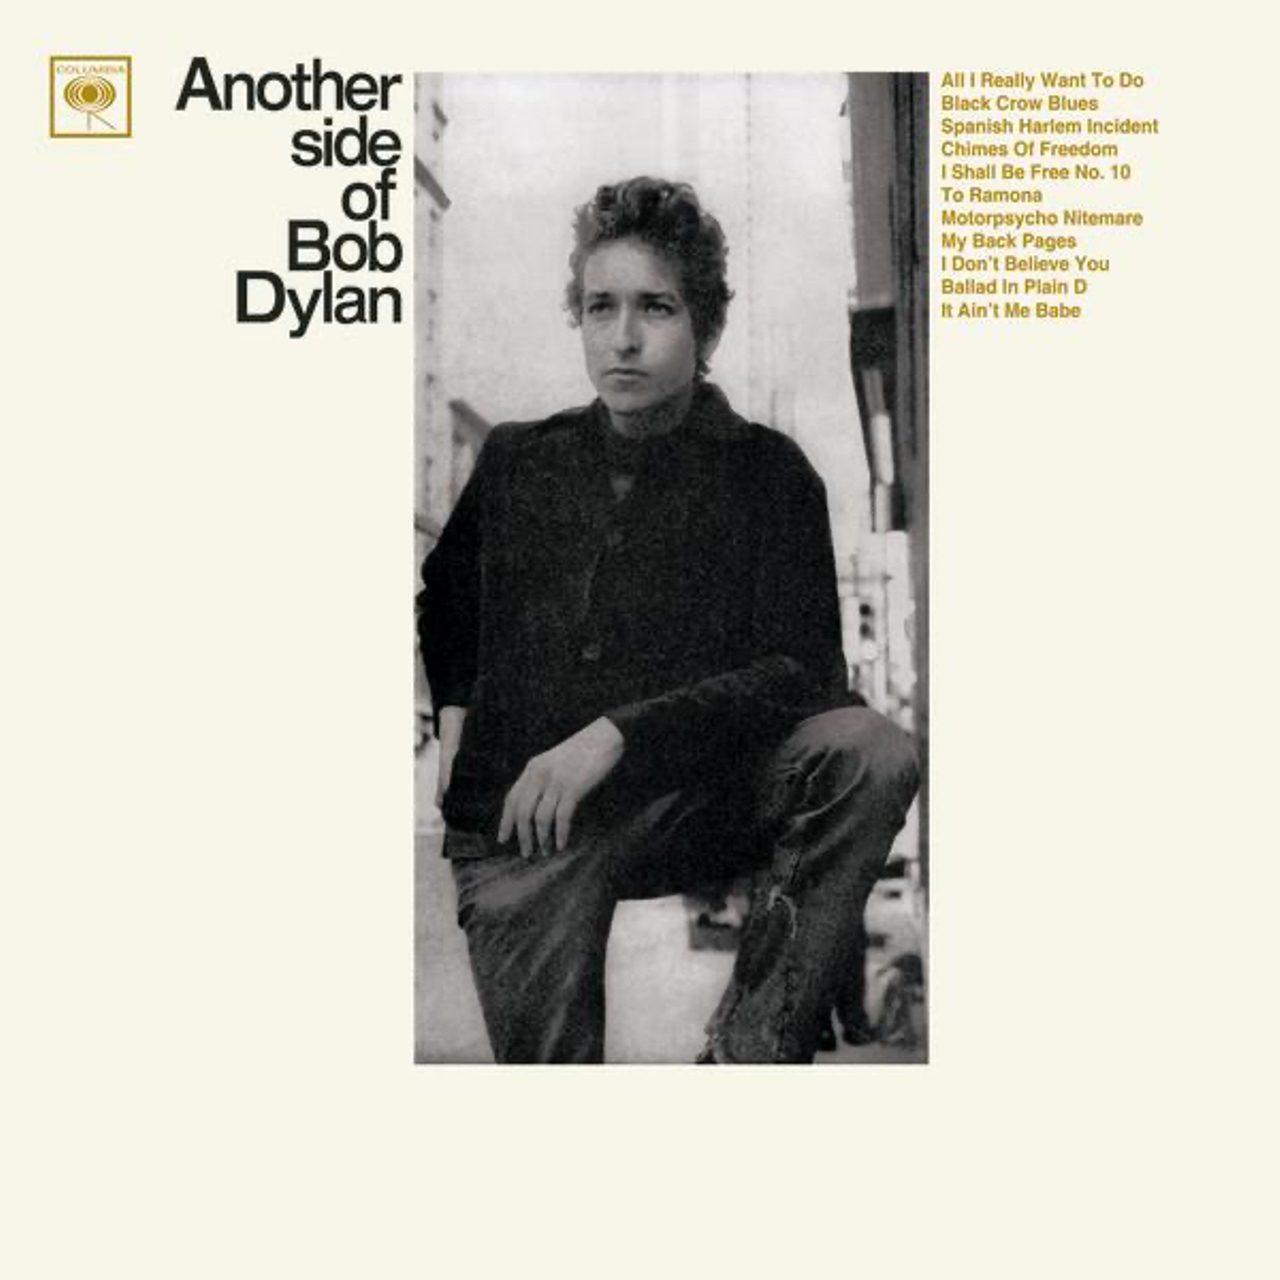 Bob Dylan - Another Side Of Bob Dylan cover album